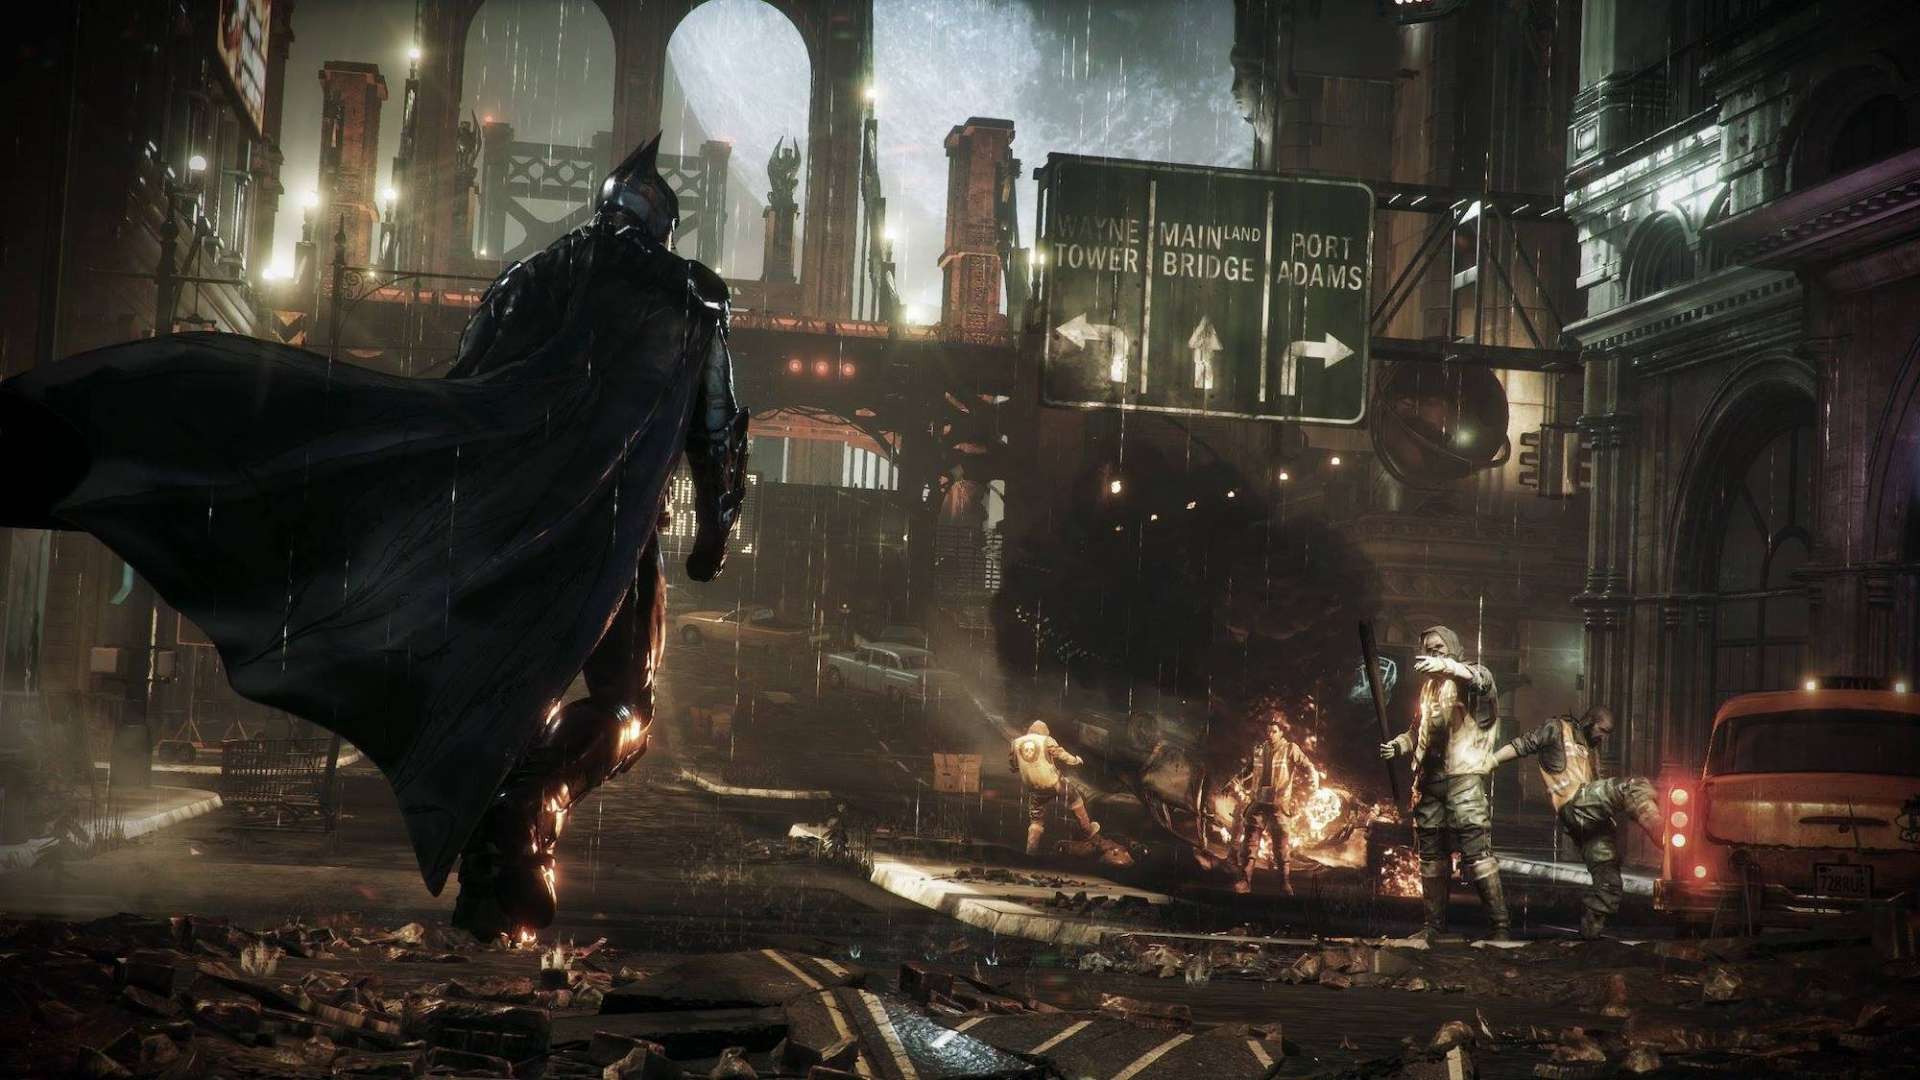 Top 10] Best Batman Games For PC (Ranked Fun To Most Fun) | GAMERS DECIDE